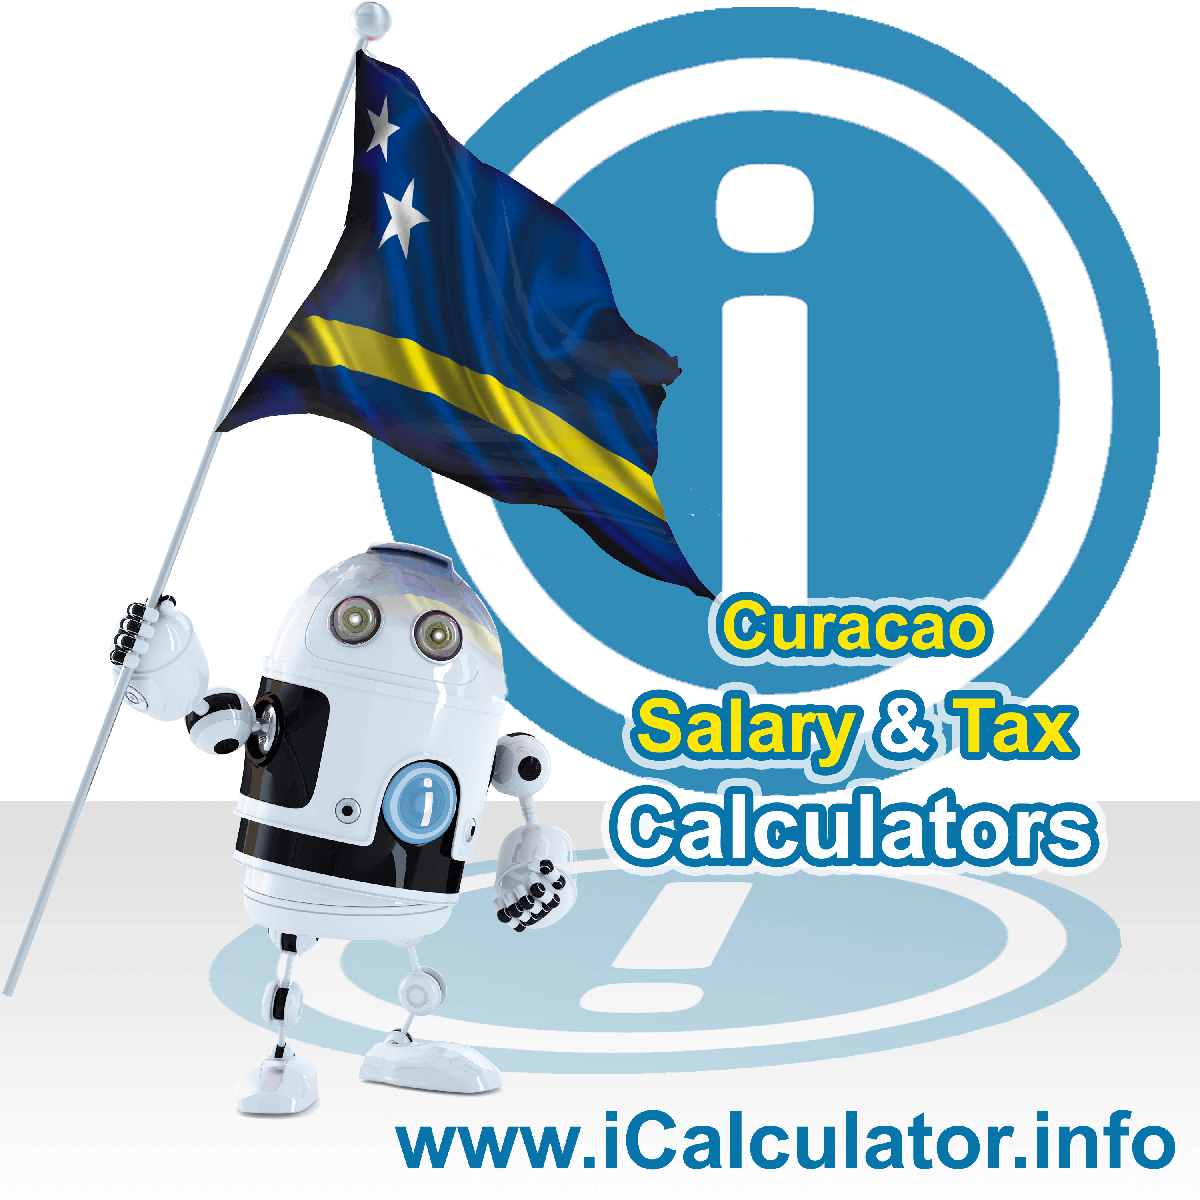 Curacao Tax Calculator. This image shows the Curacao flag and information relating to the tax formula for the Curacao Salary Calculator